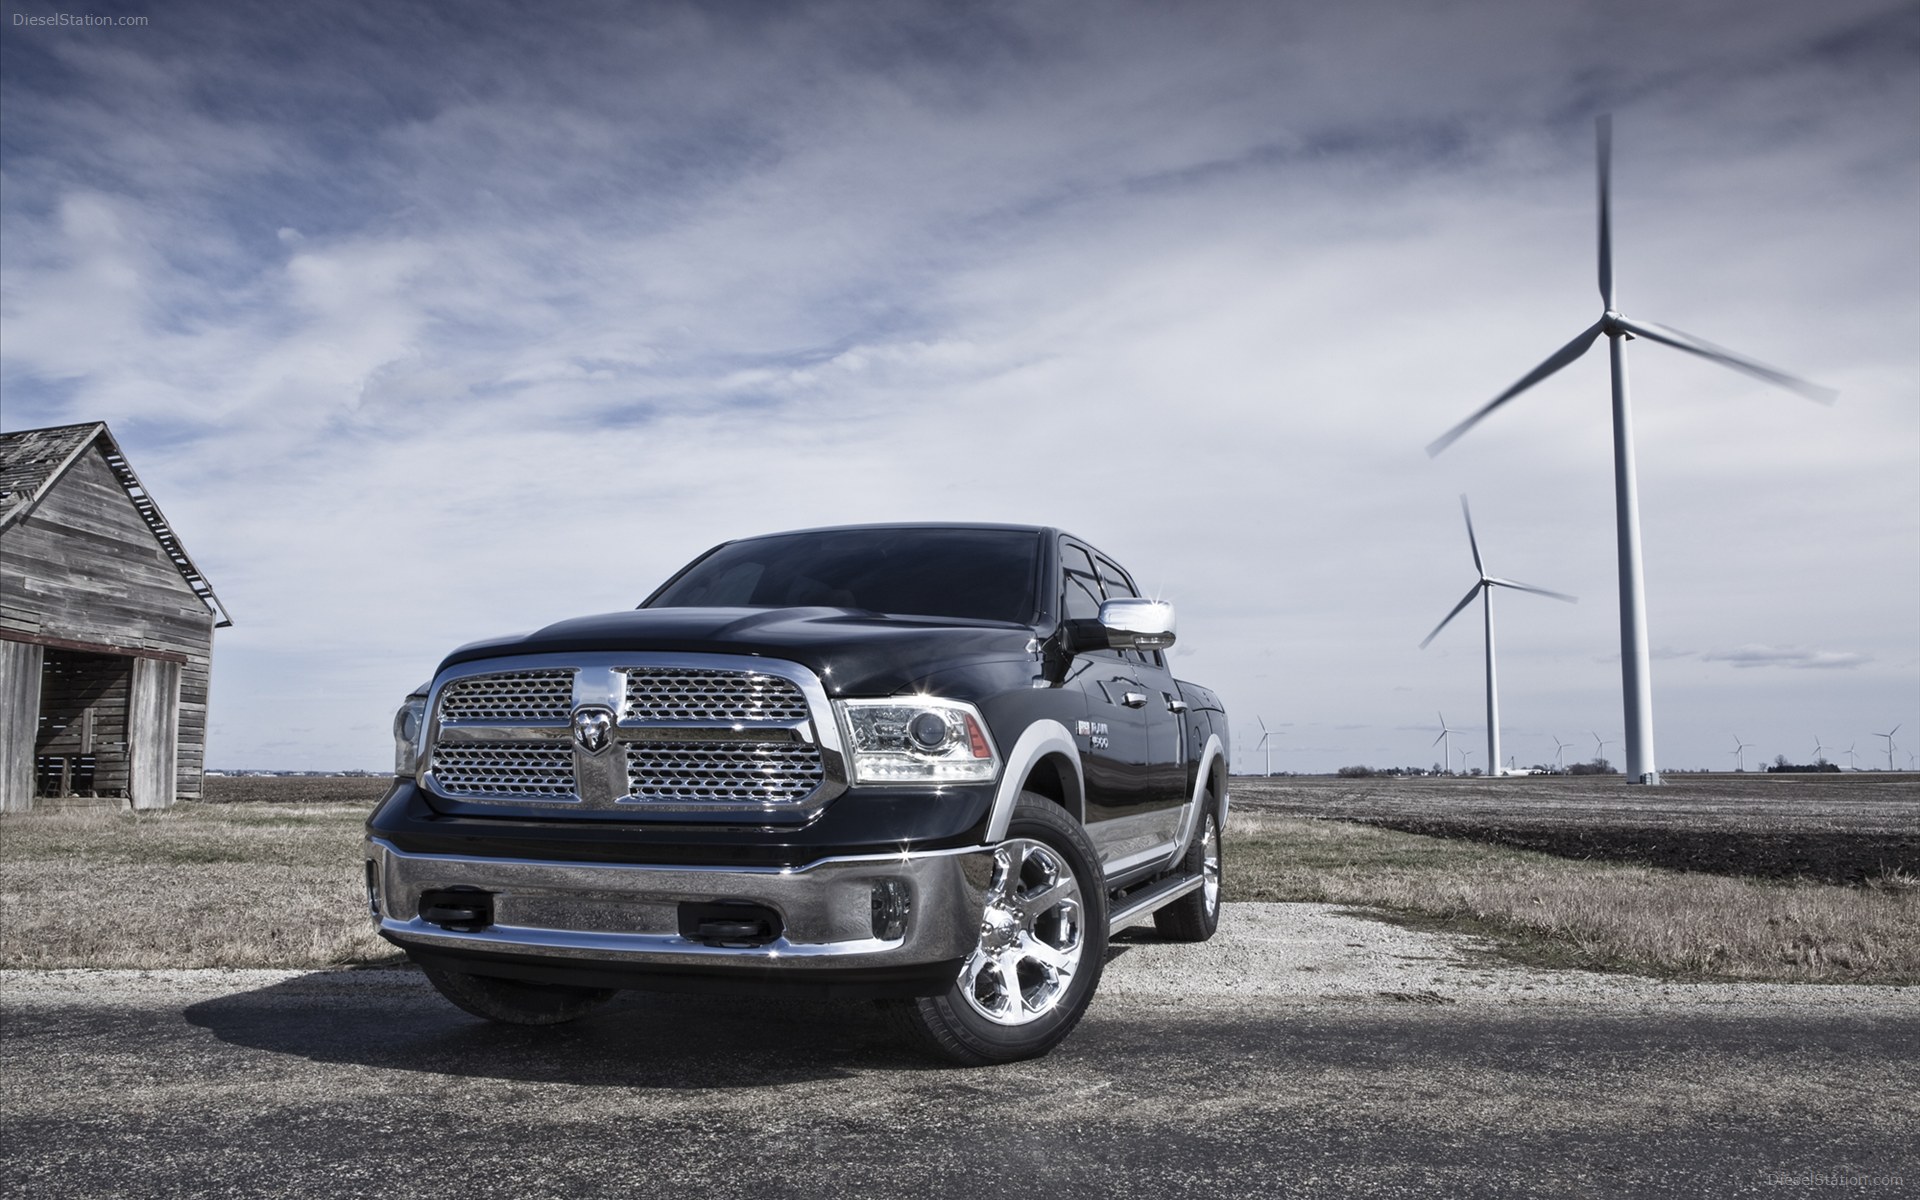 Dodge Ram Widescreen Exotic Car Picture Of